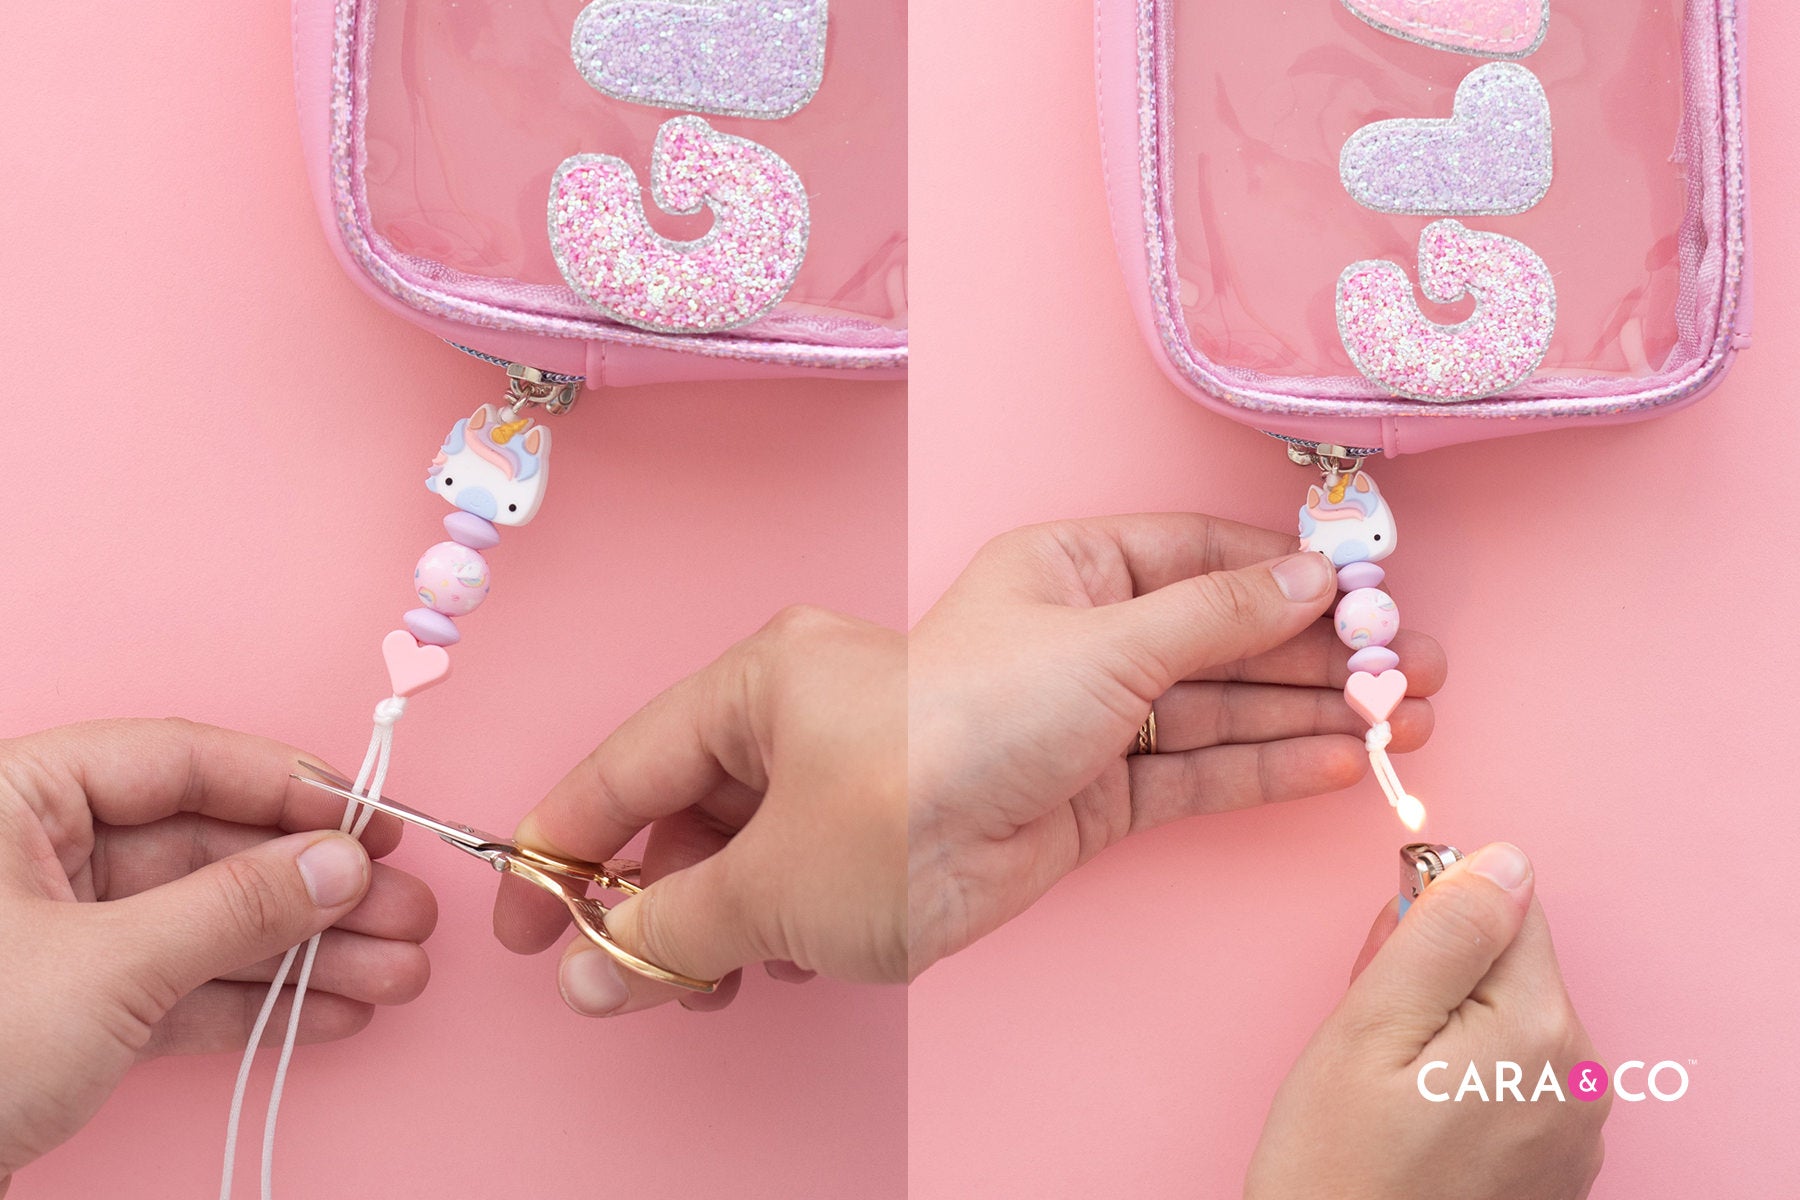 Trim Your Cord - Fuse your Ends - Zipper Pull Tutorial - CaraBLOG